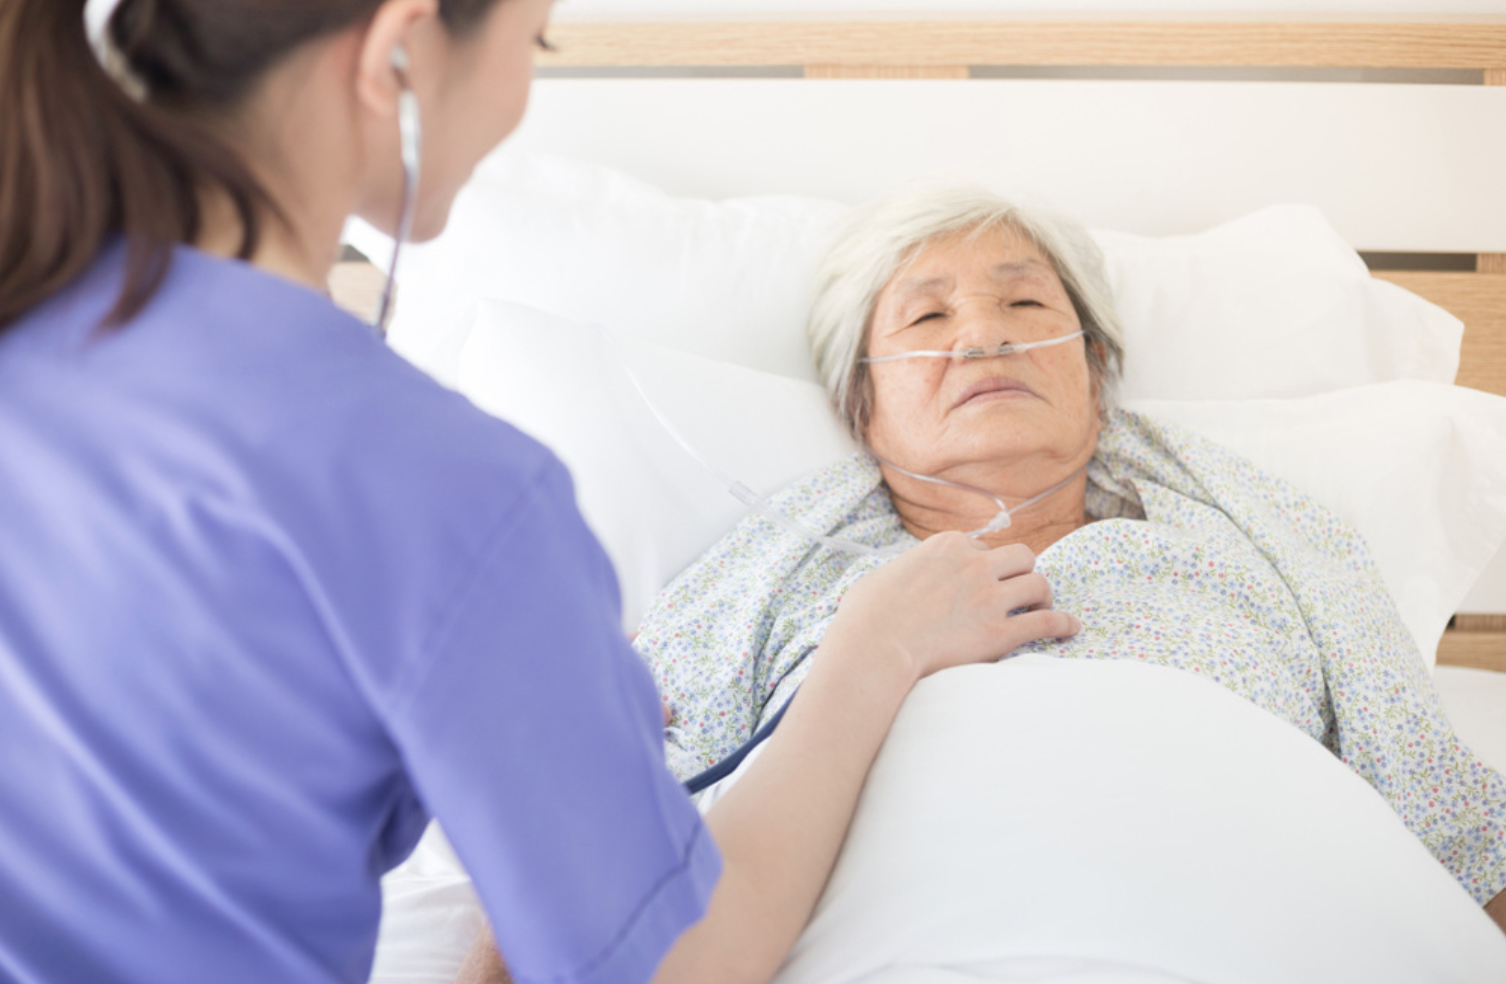 Integrating Palliative Care Early in Cancer Diagnosis Improves Quality of Life, May Improve Outcomes